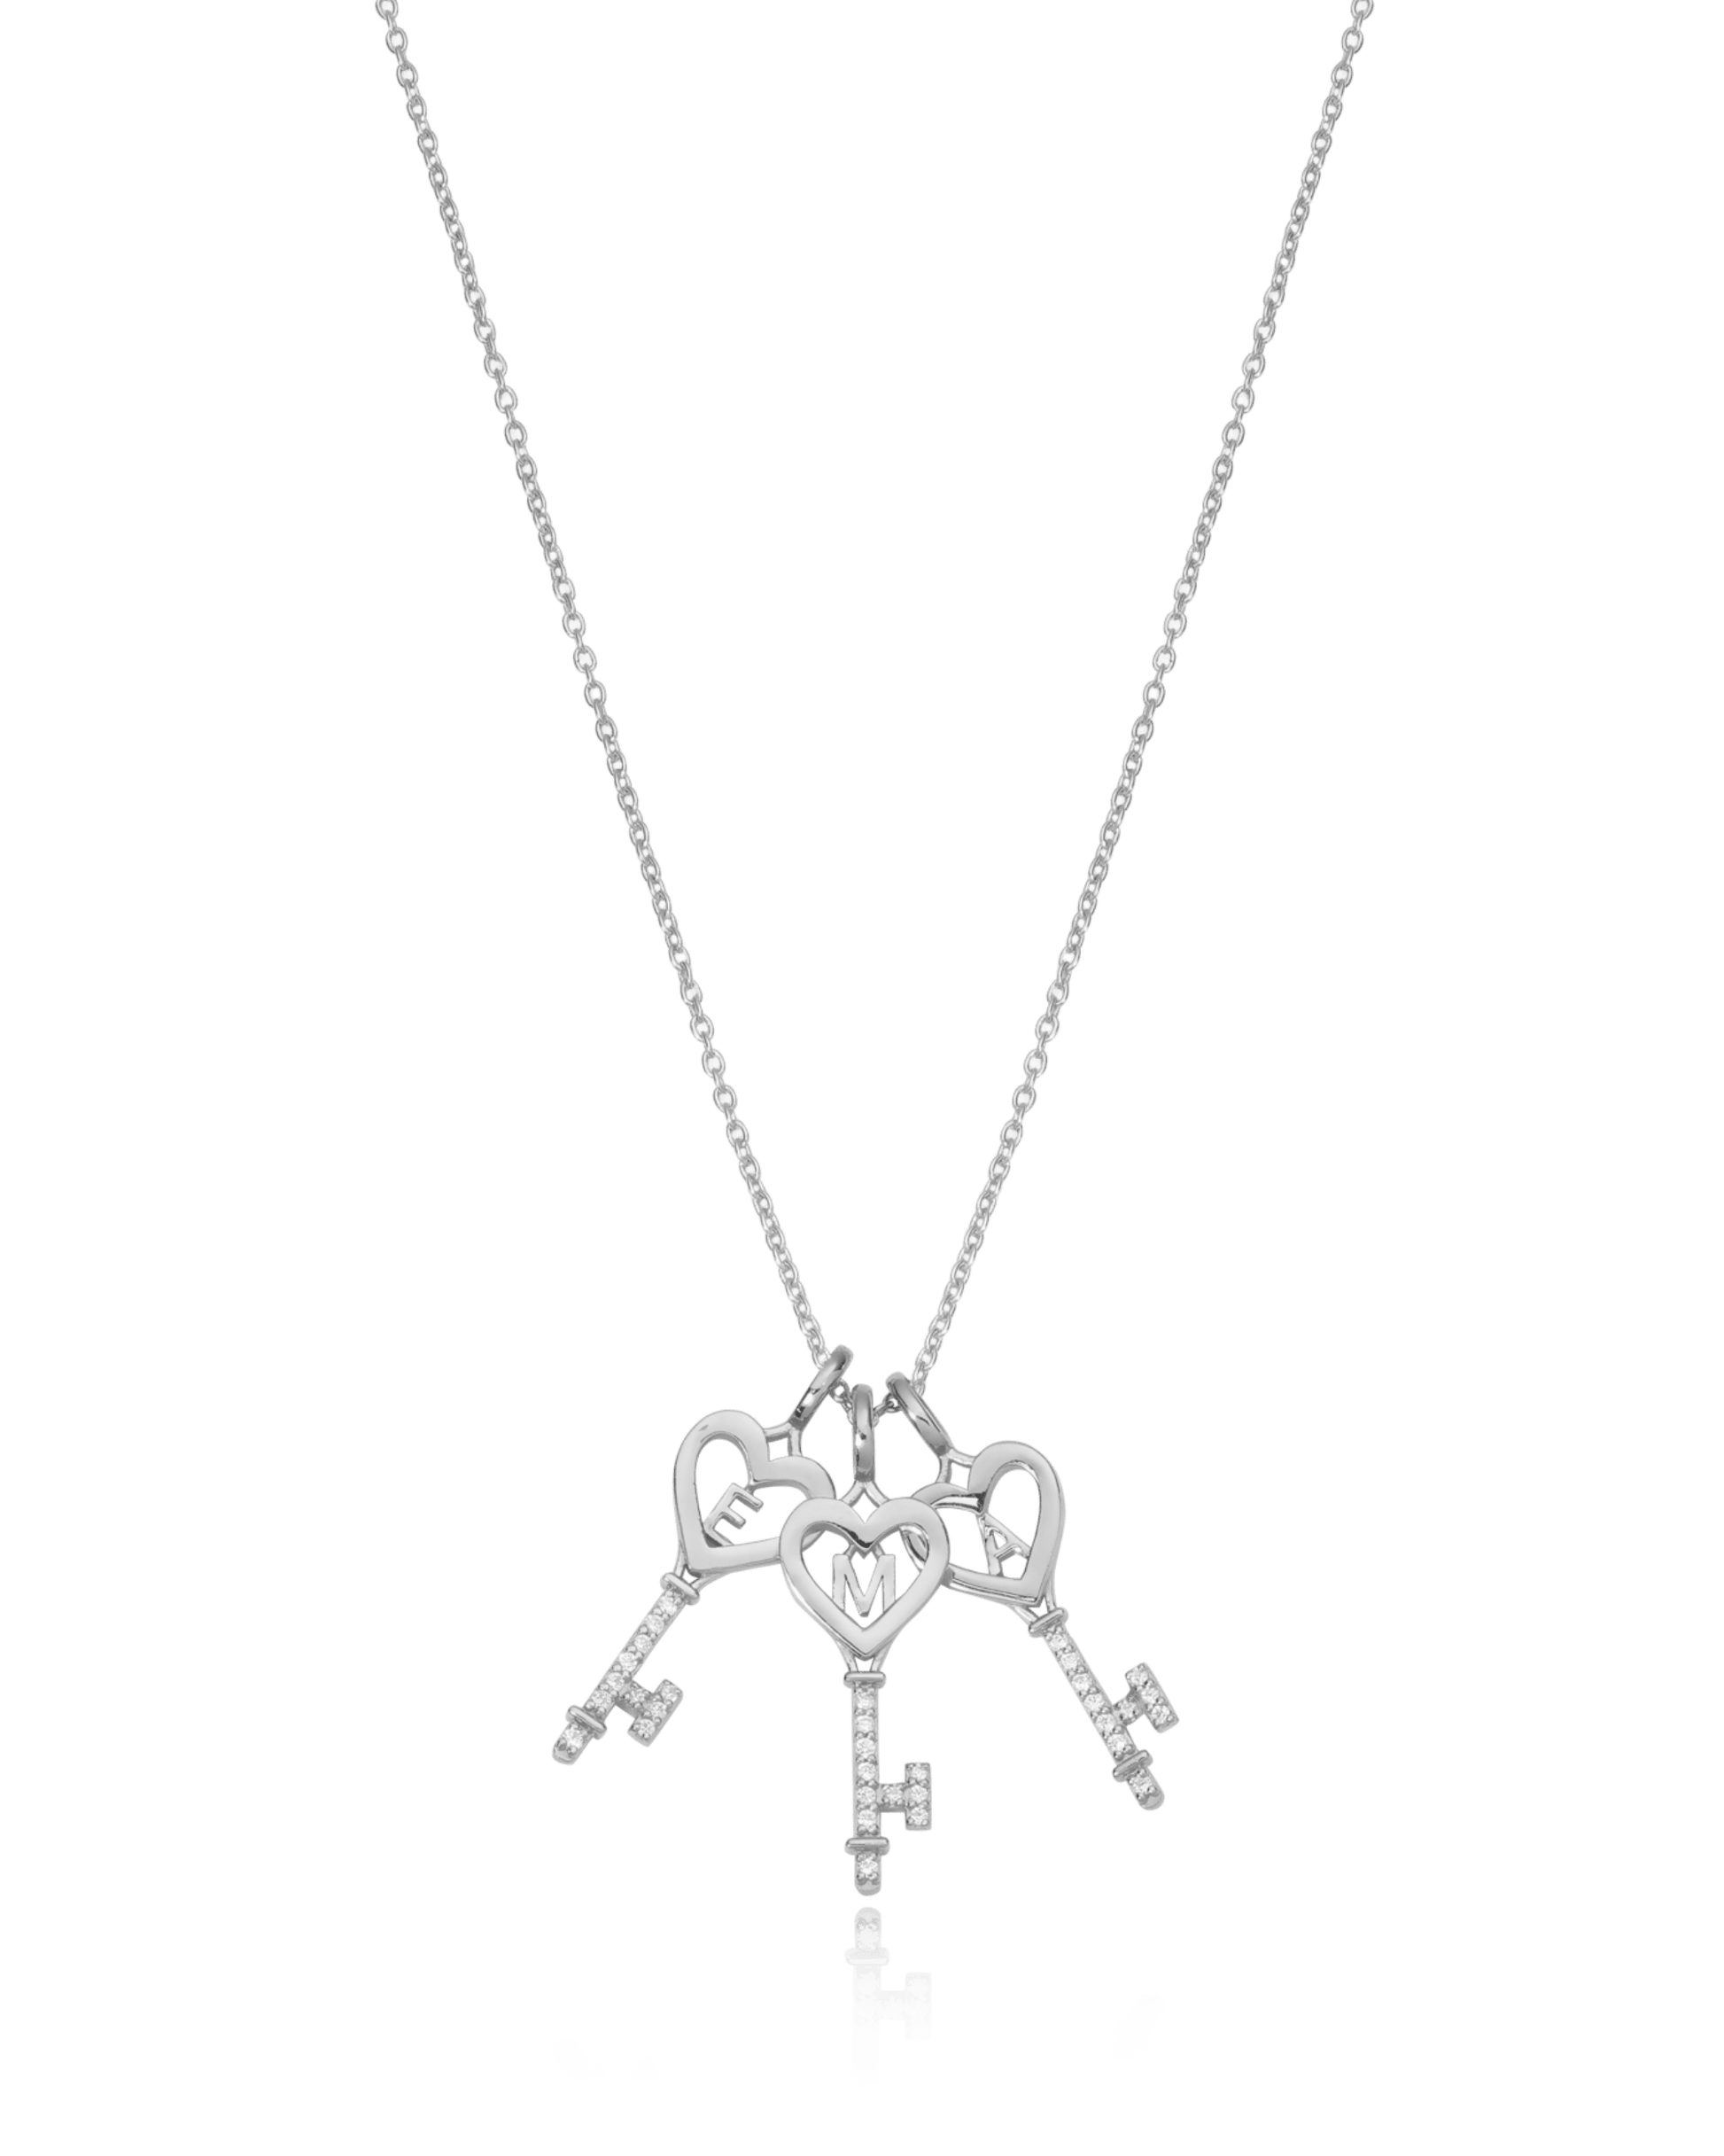 Key To My Heart Necklace with Diamond - 925 Sterling Silver Necklaces magal-dev 1 Key 16" 